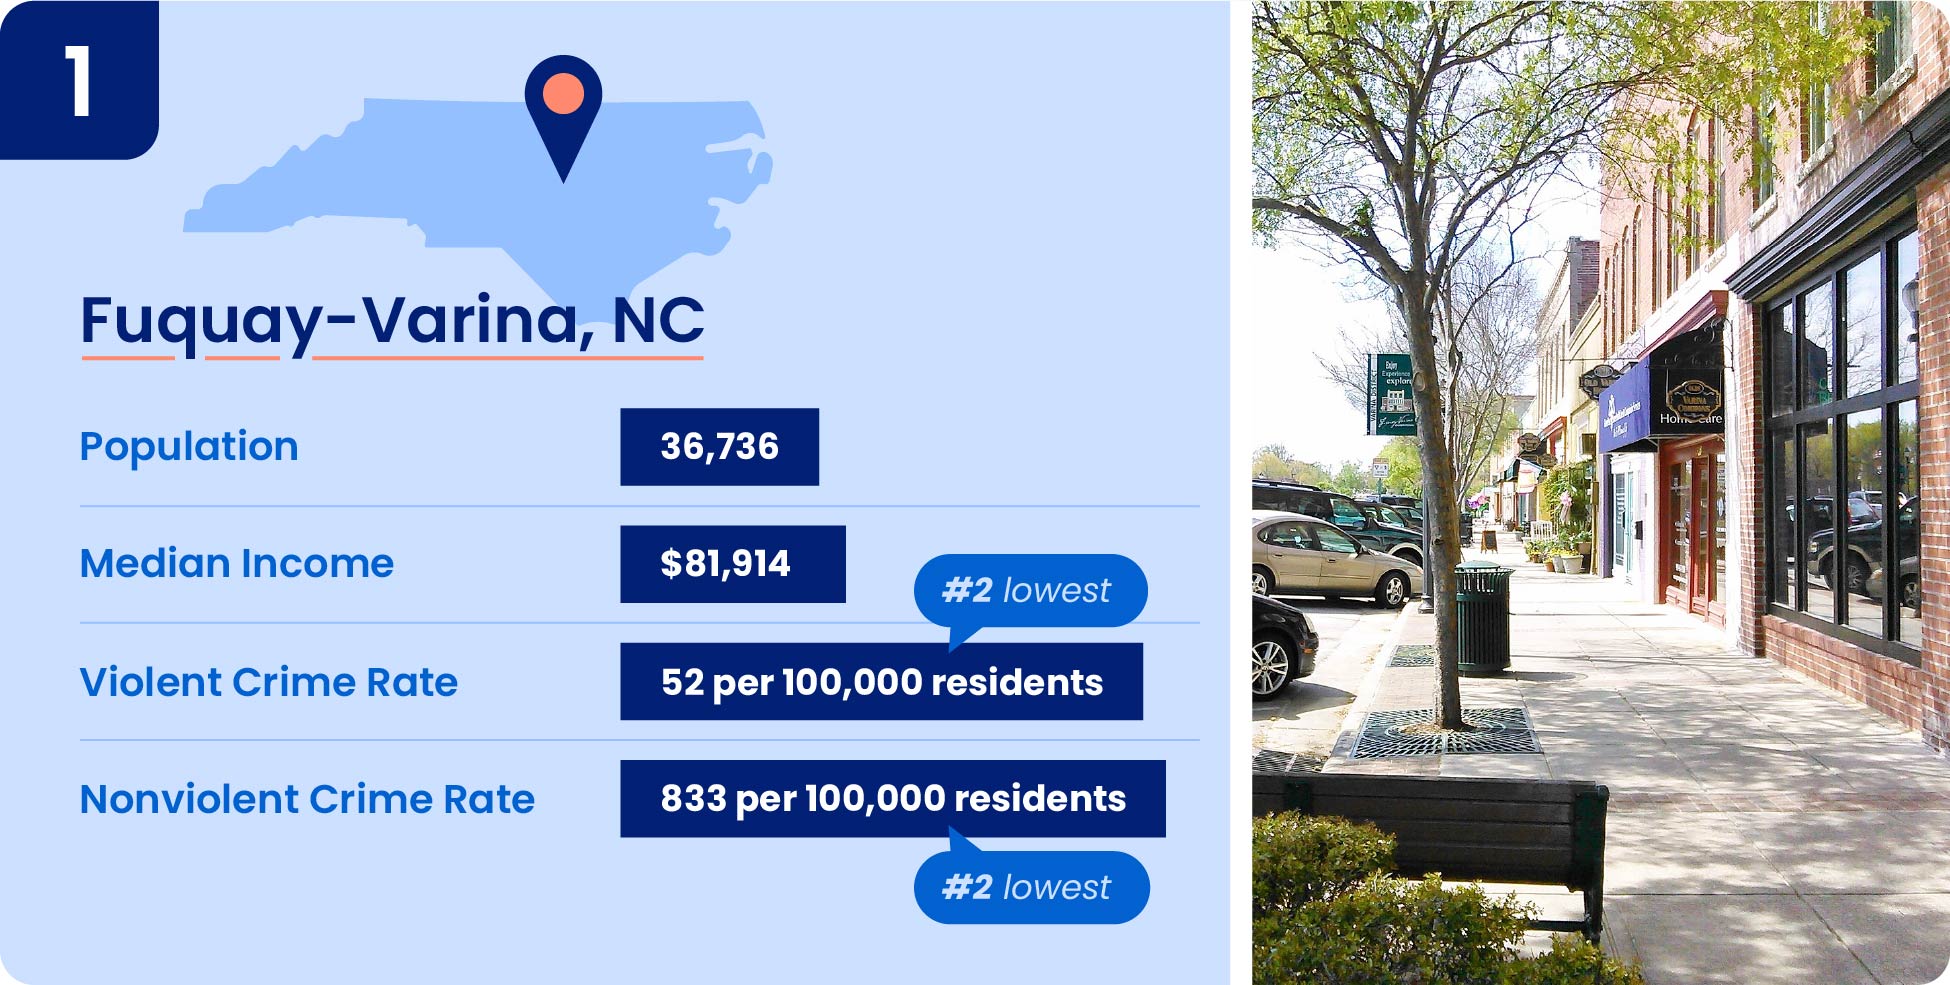 Fuquay-Varina is one of the safest cities in NC